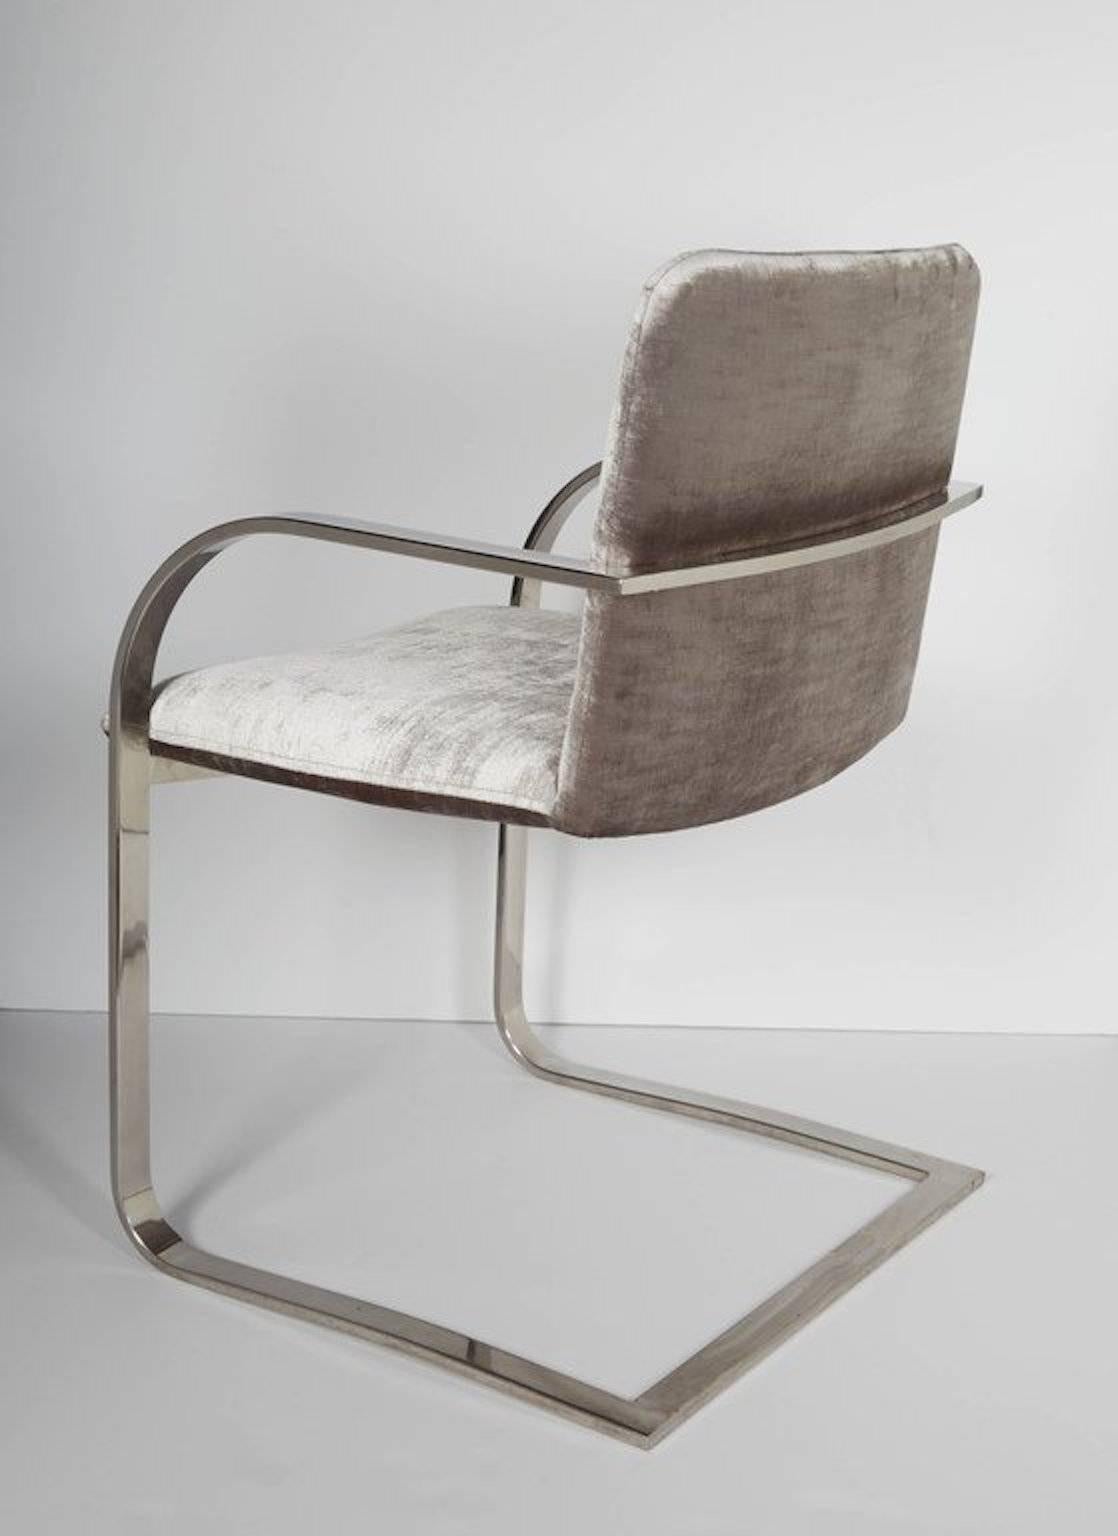 Mid-Century modern desk chair with cantilevered frame design. Chair has streamlined profile with curved armrests and floating seat details. The chair is made of a polished steel frame. Newly upholstered in luxe platinum velvet-cotton fabric.
      